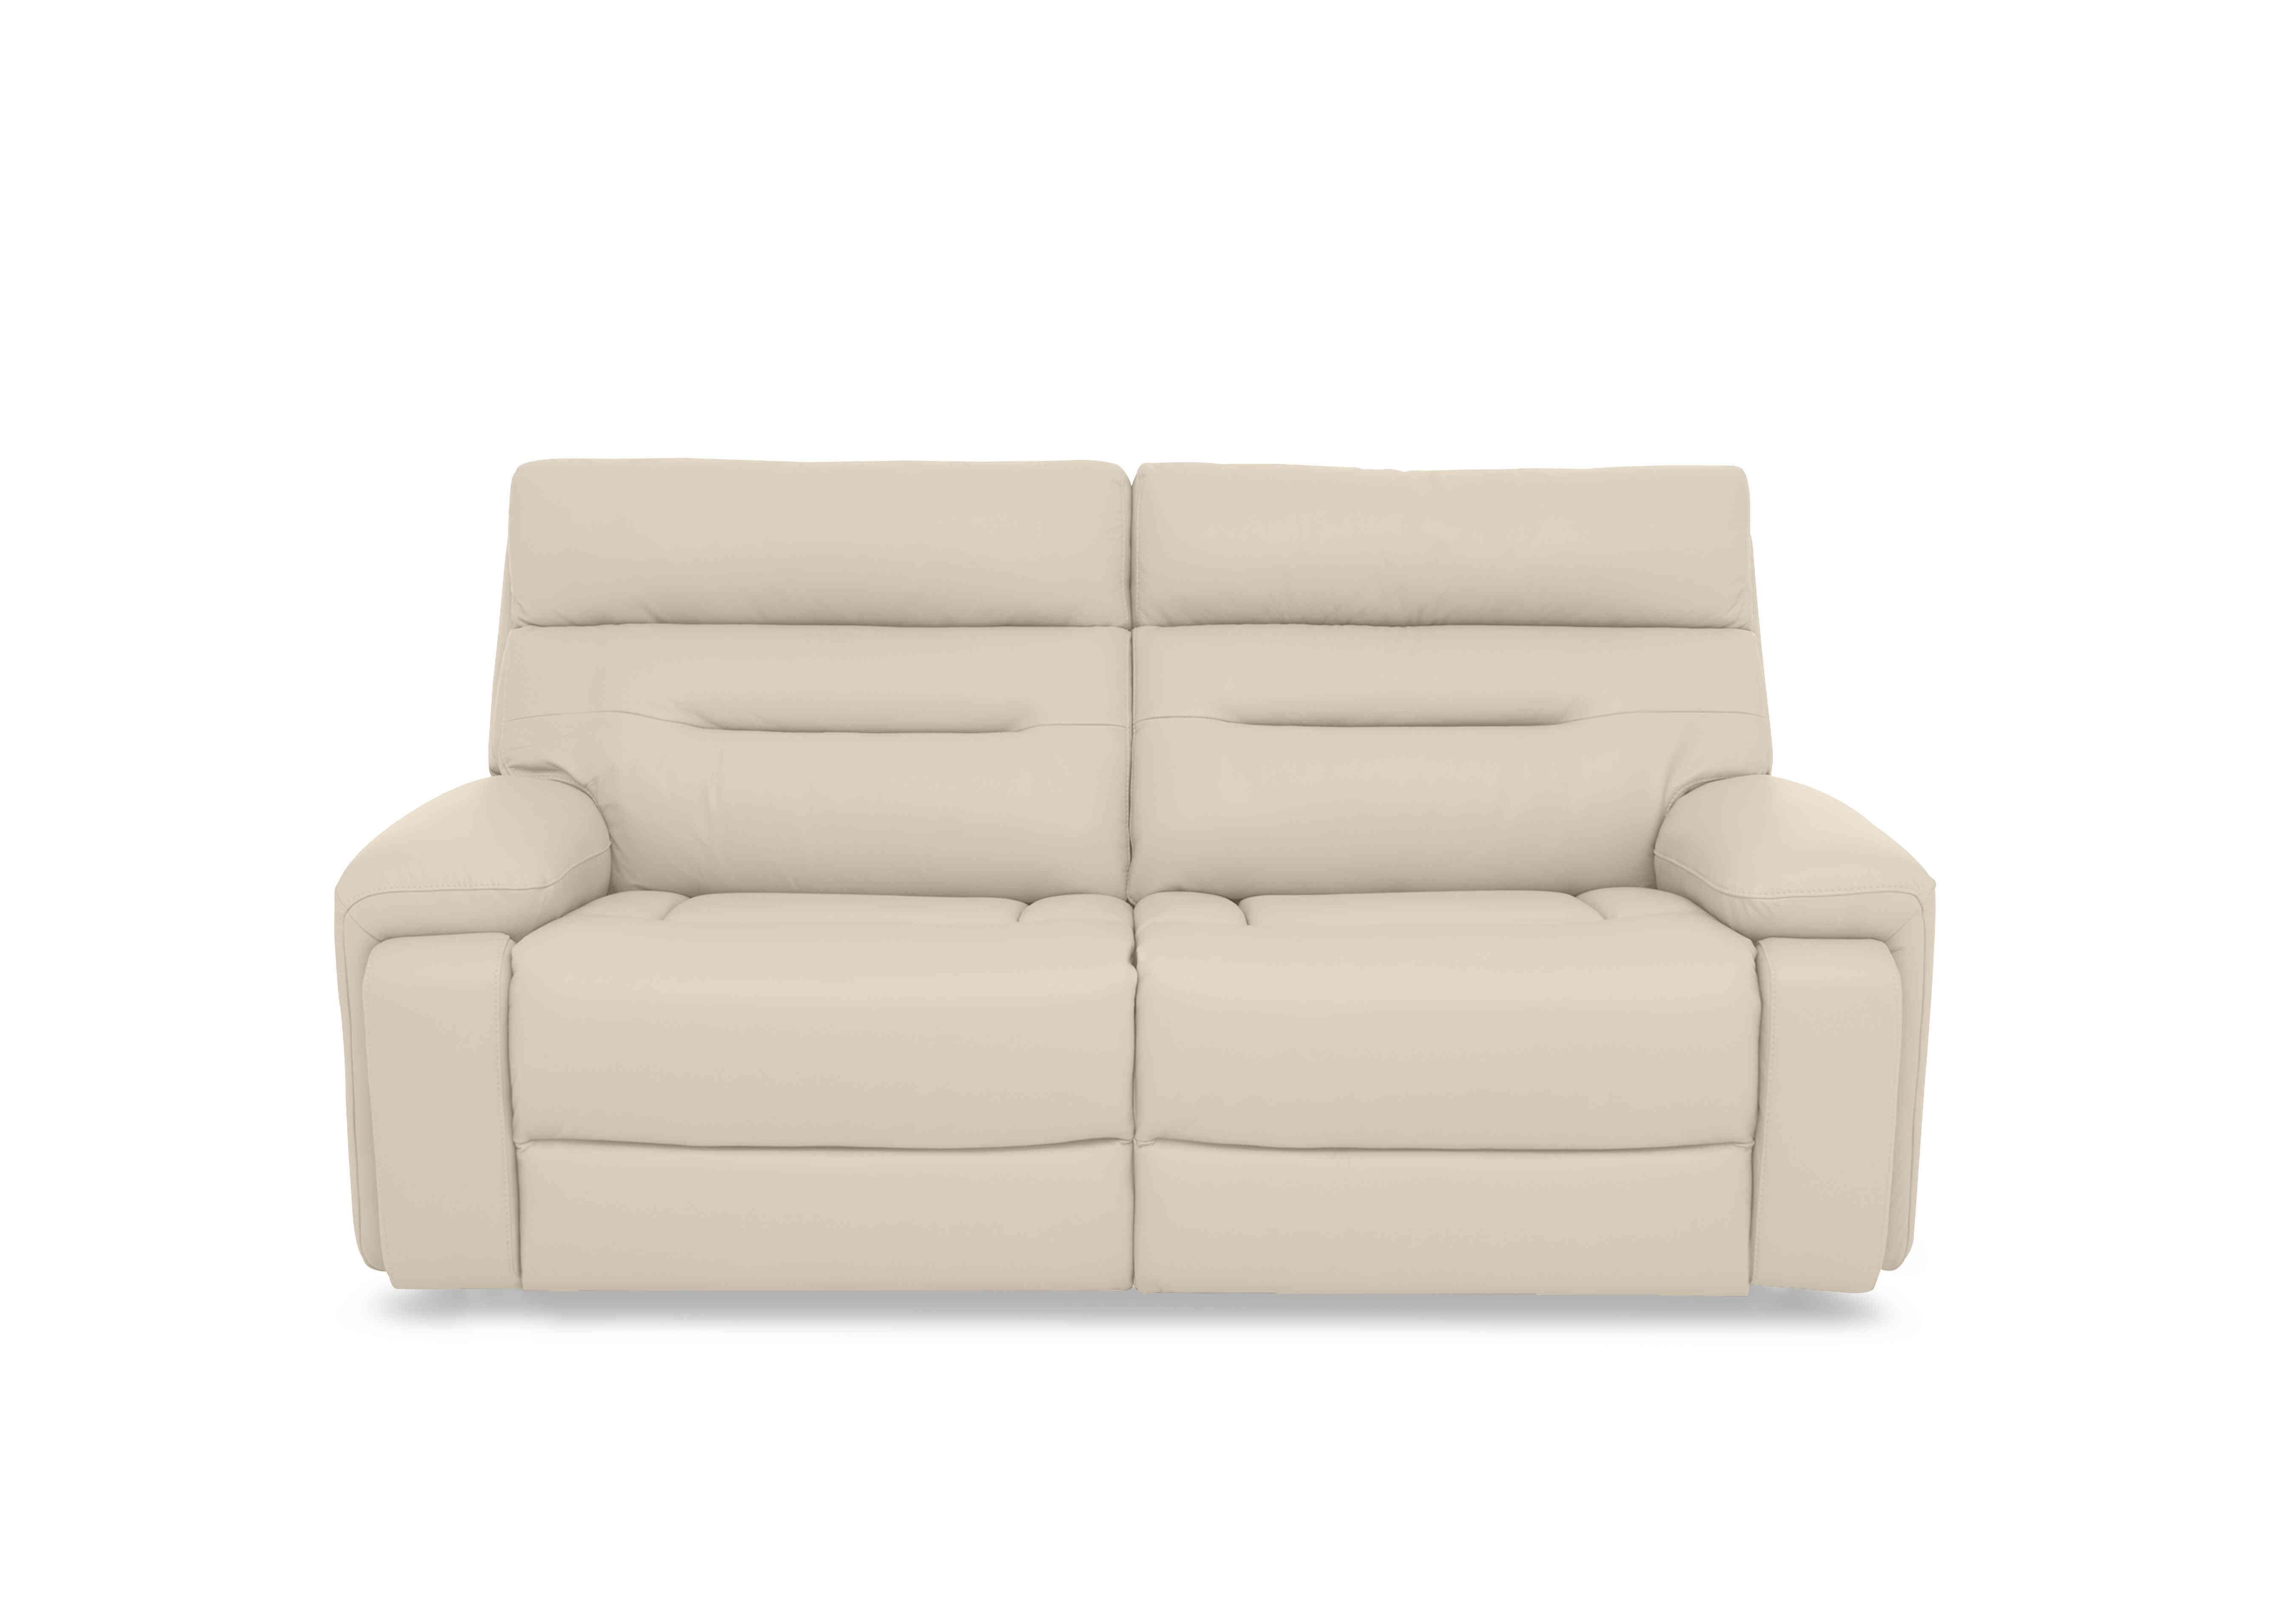 Cinemax 3 Seater Leather Sofa in Lx-6407 Stone on Furniture Village